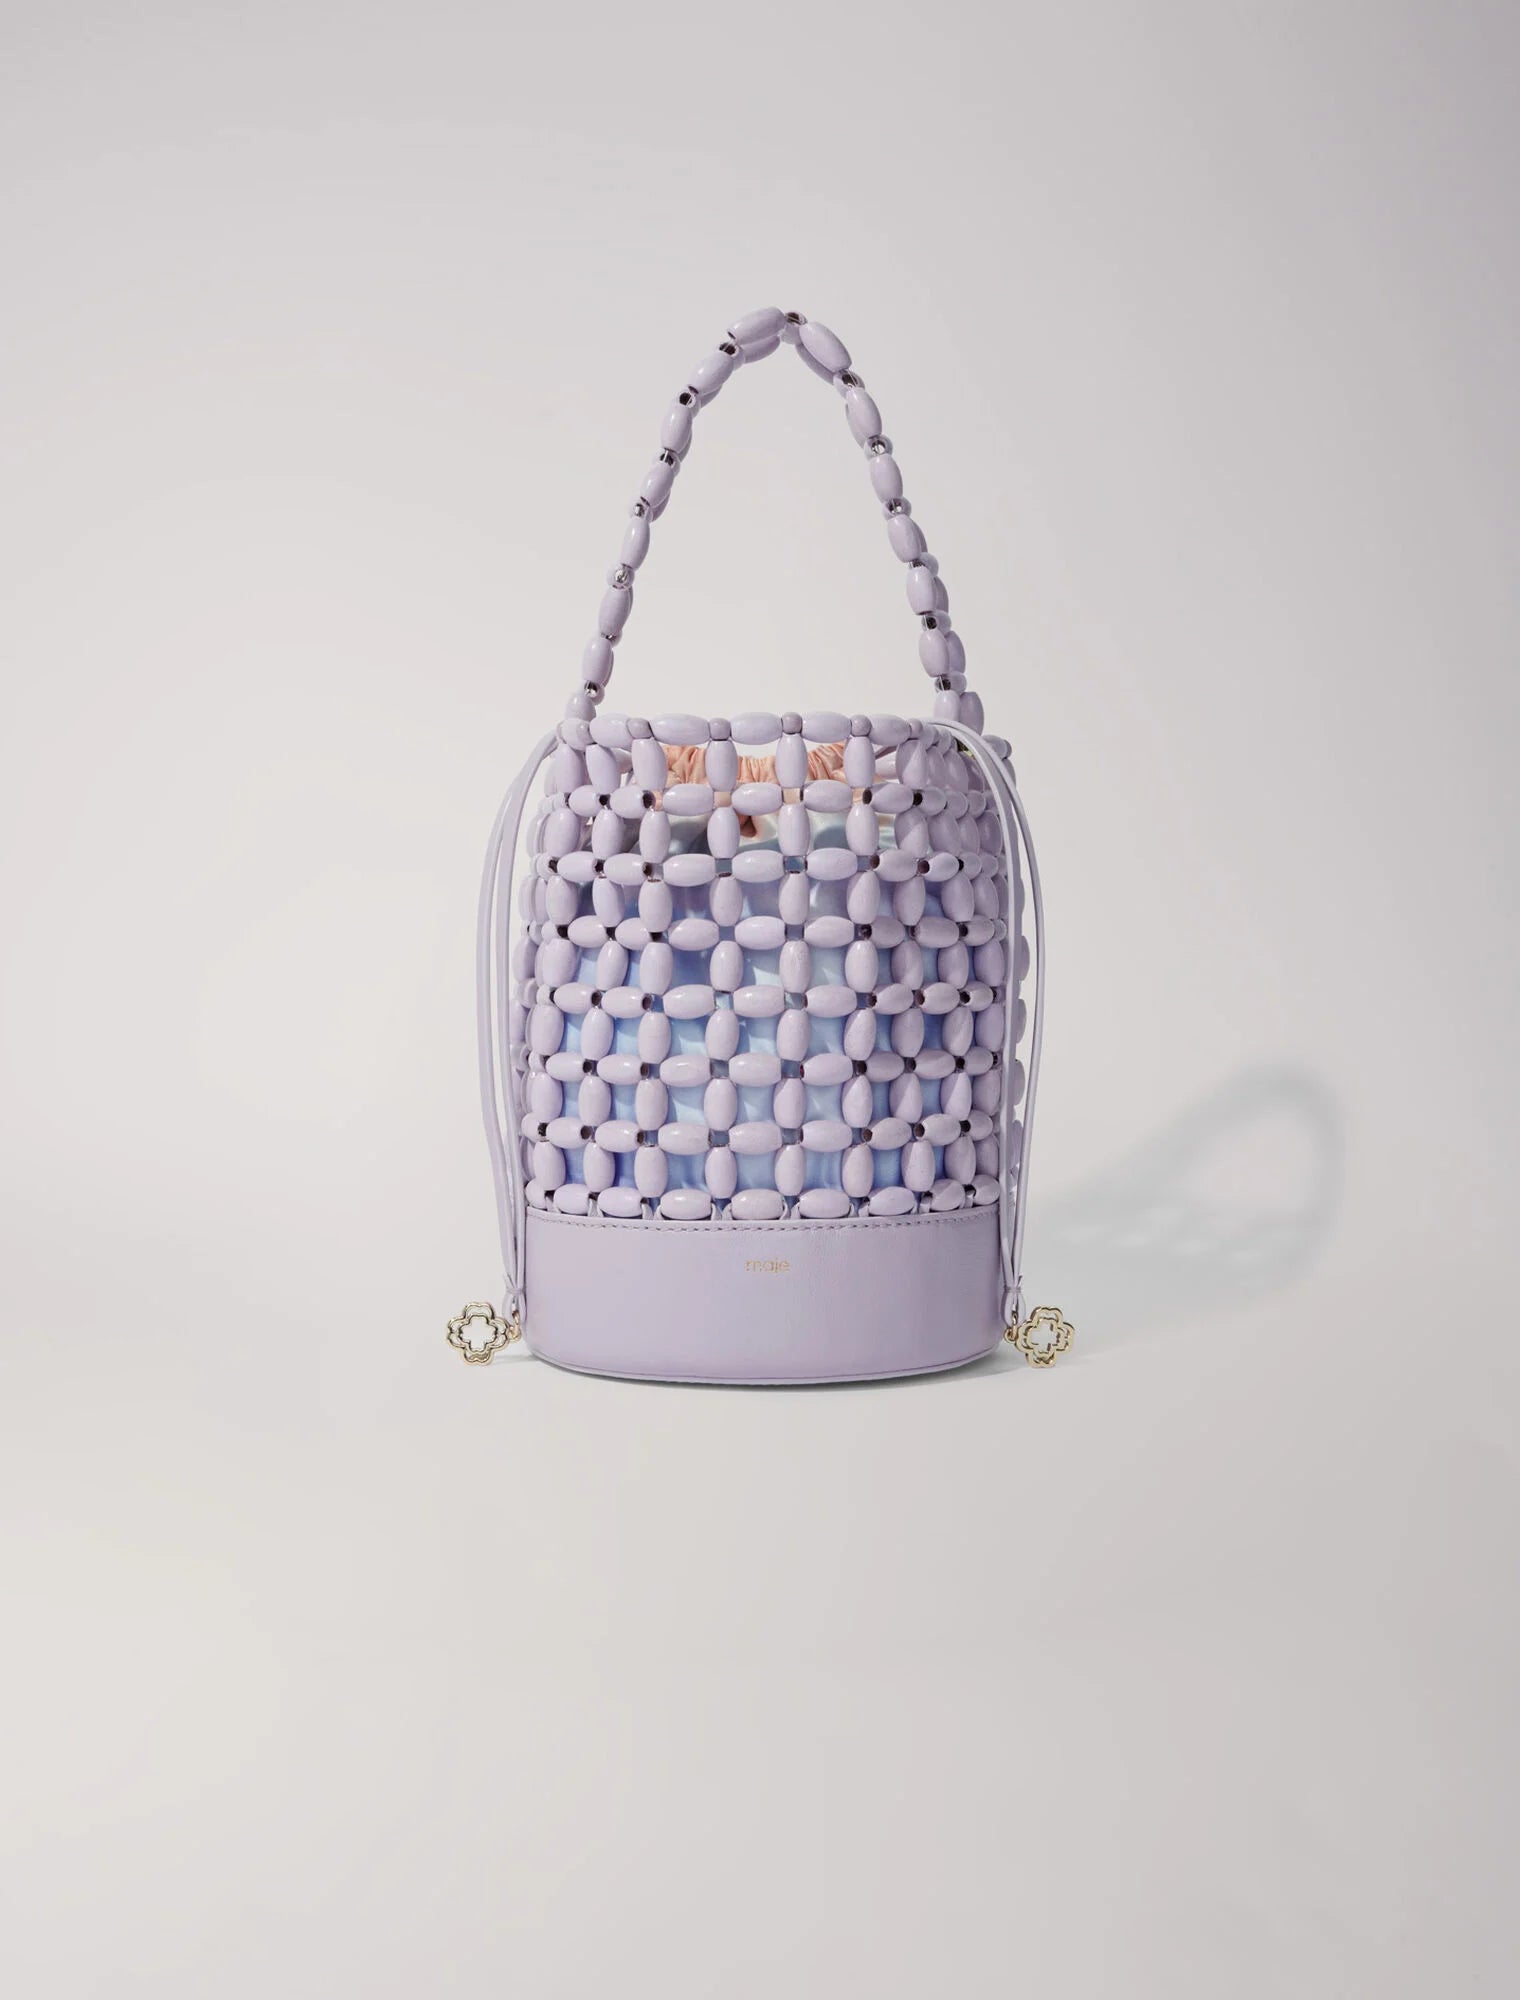 Parma Violet-featured-Bucket bag embellished with beads